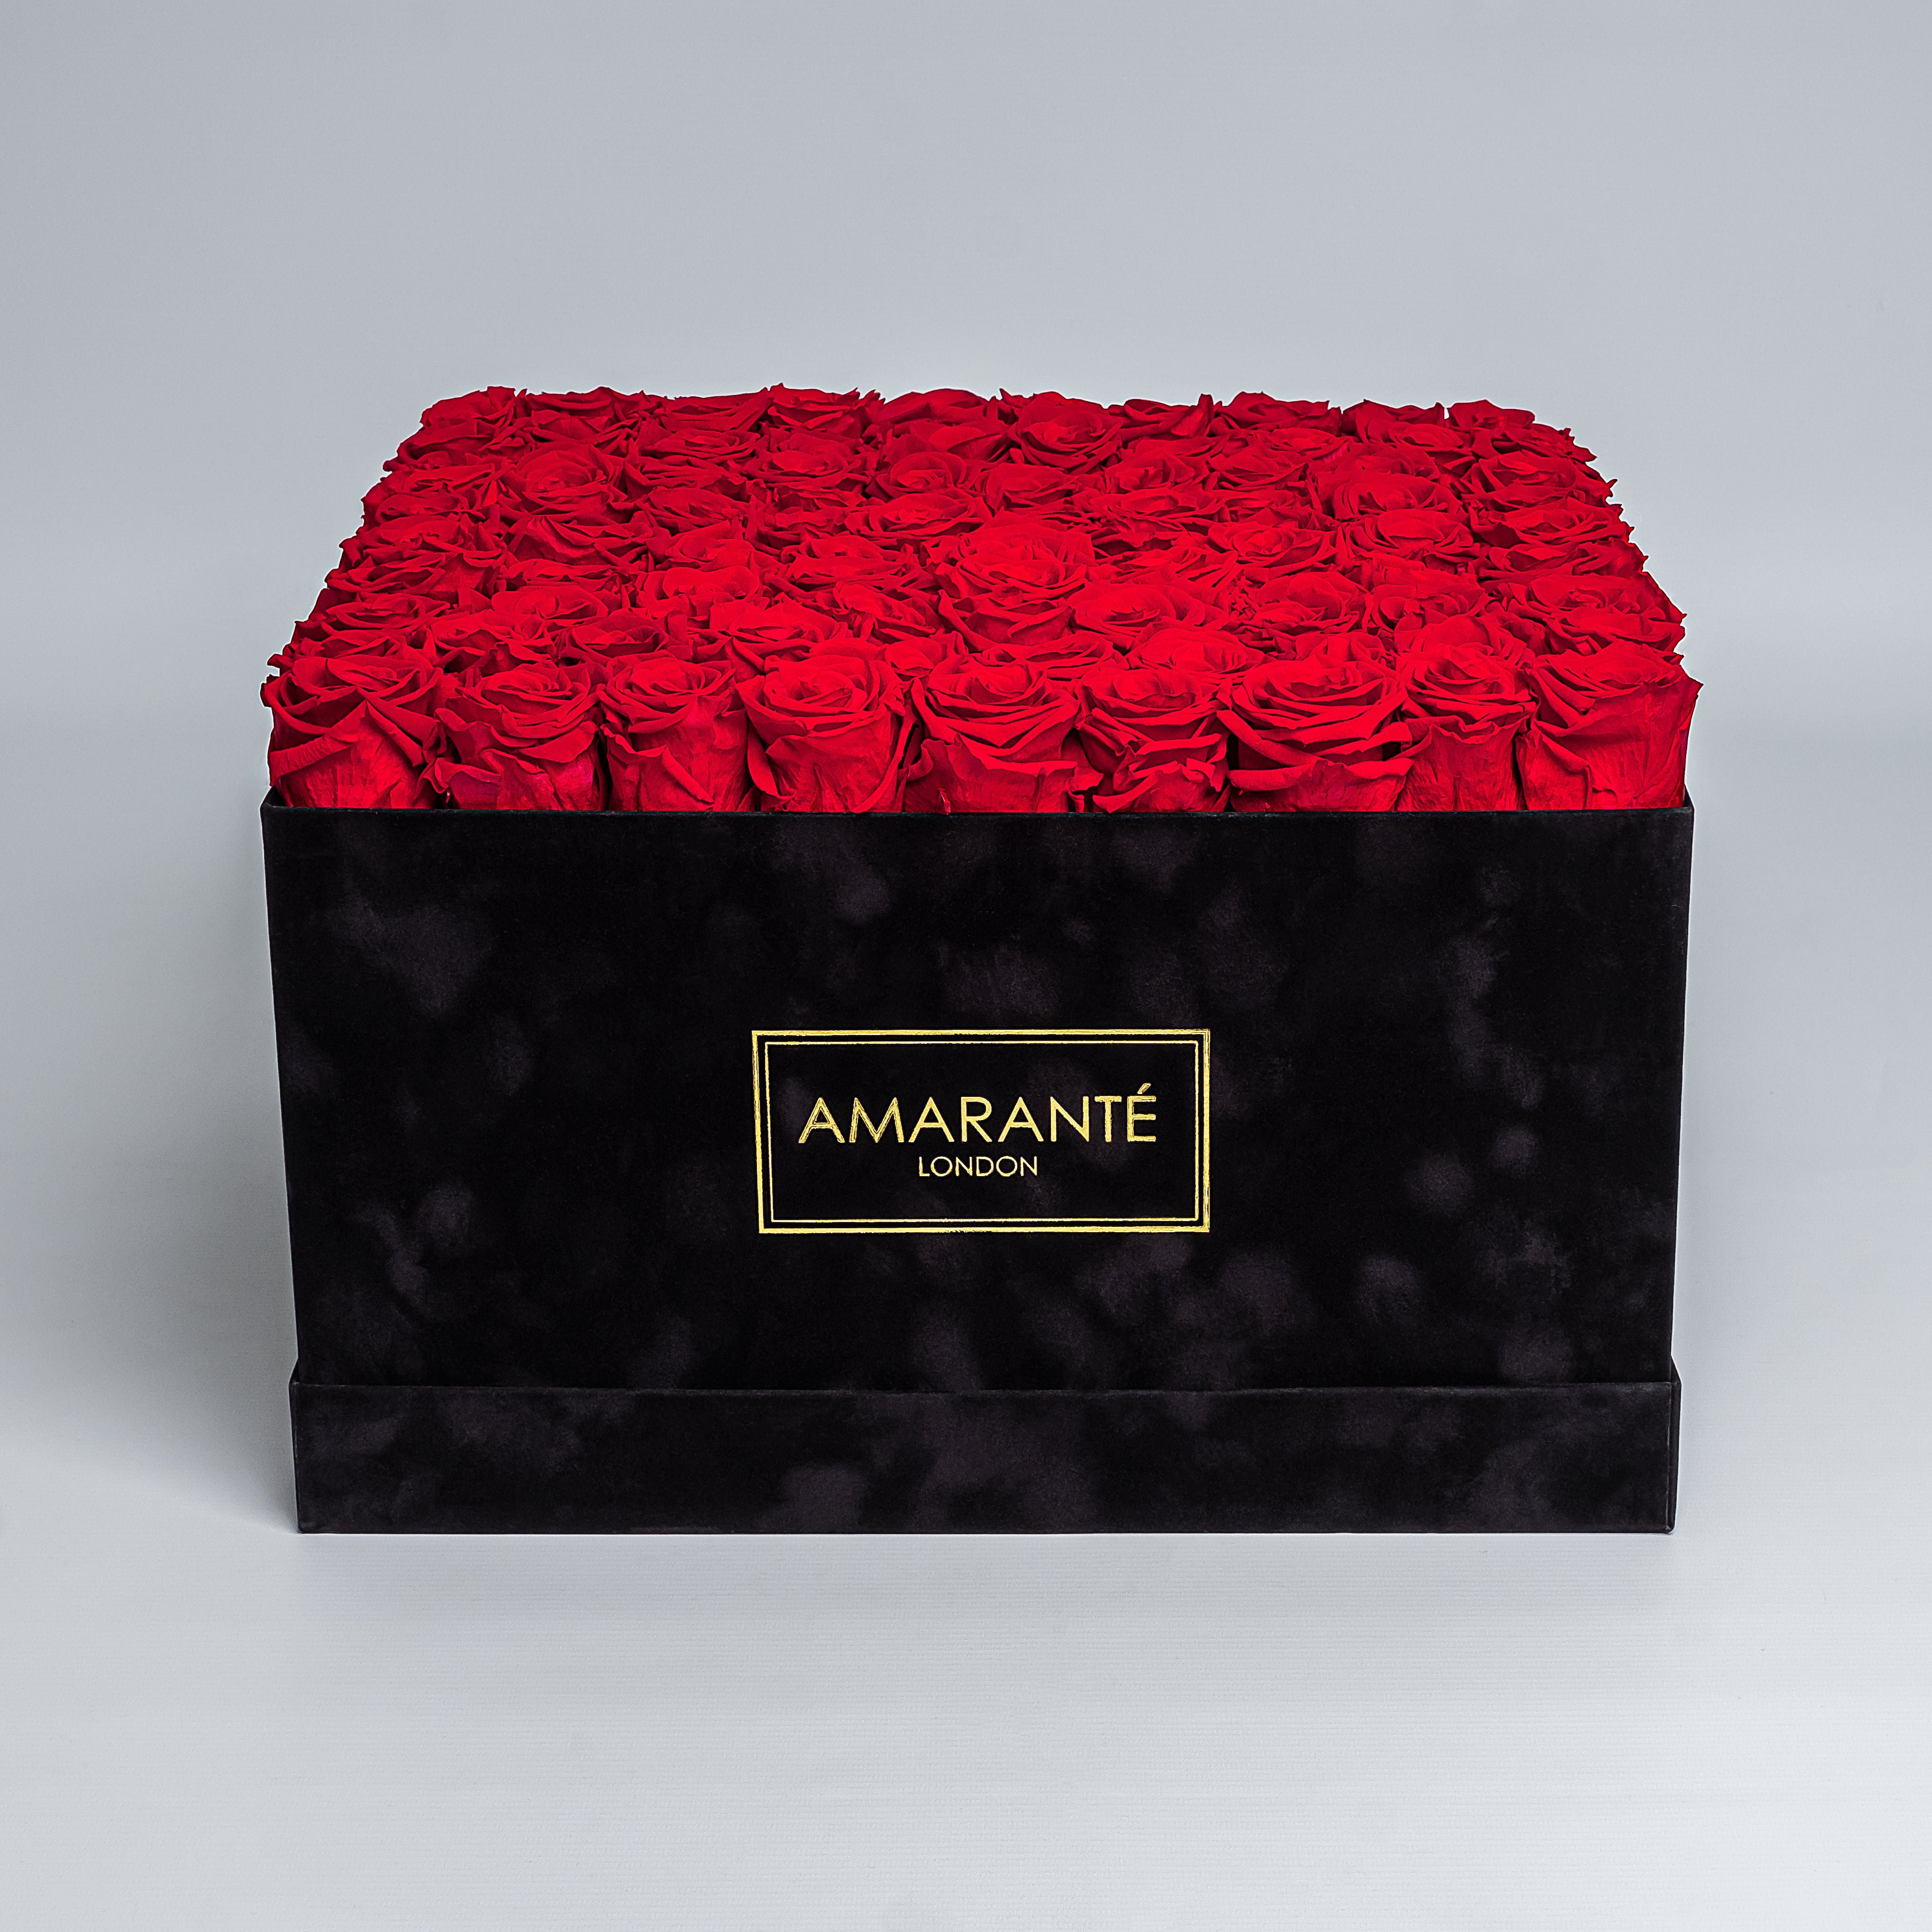 100 Roses in 14 colours, in a Deluxe Square Black Rose Box